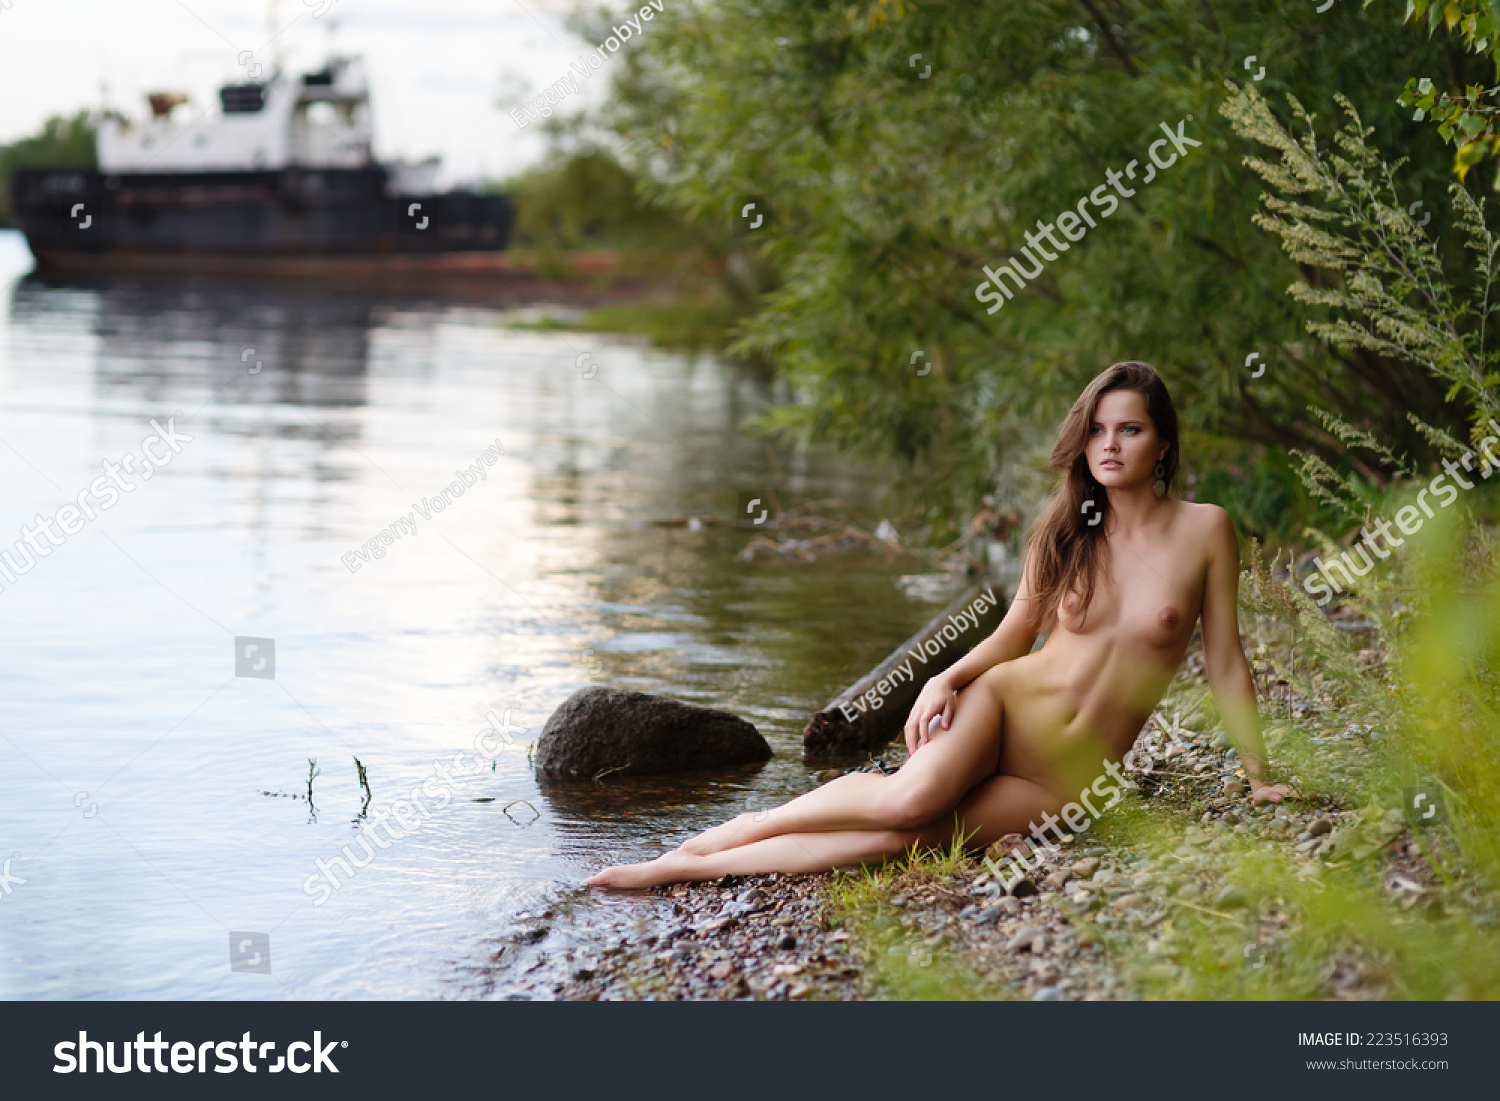 Nude Girl In River gifs flowing